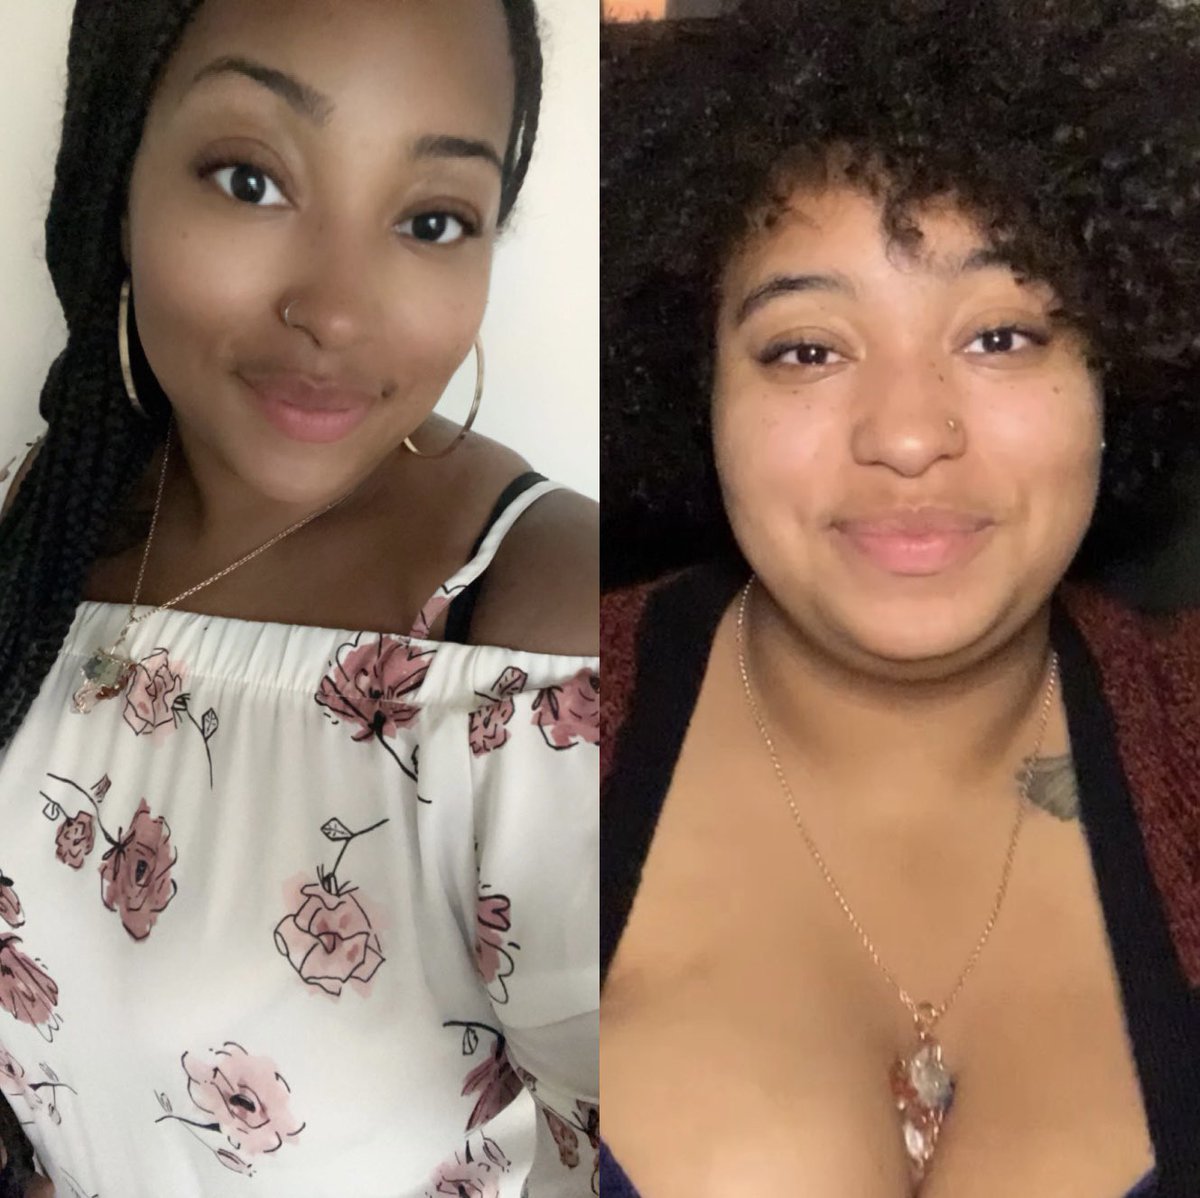 That’s crazy 🫢 losing weight in your face will have a mf acting different. Its me, I’m mfs! 🥹 I’m so proud of myself 🥰 #stillworking

Side note: I purchased that white top a few years ago and couldn’t fit it. Now it’s a lot bigger on me than expected 🥲✨